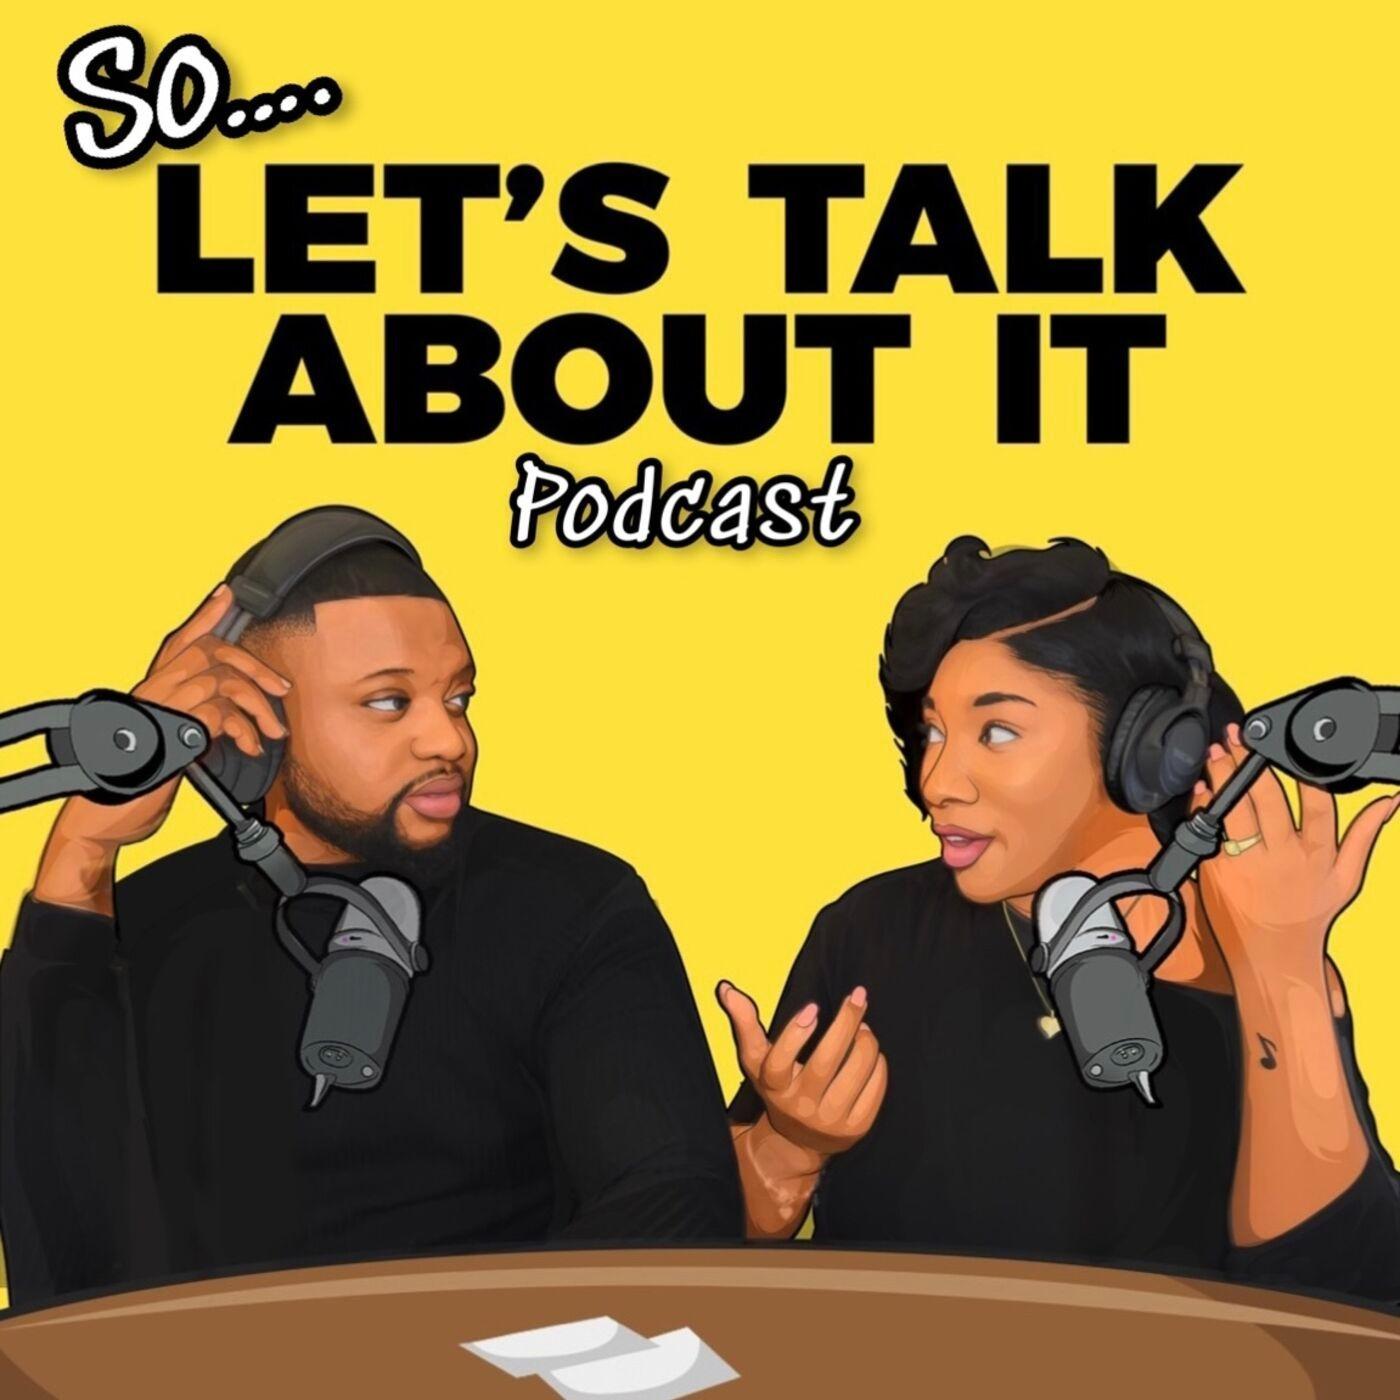 So Let's Talk About It Podcast